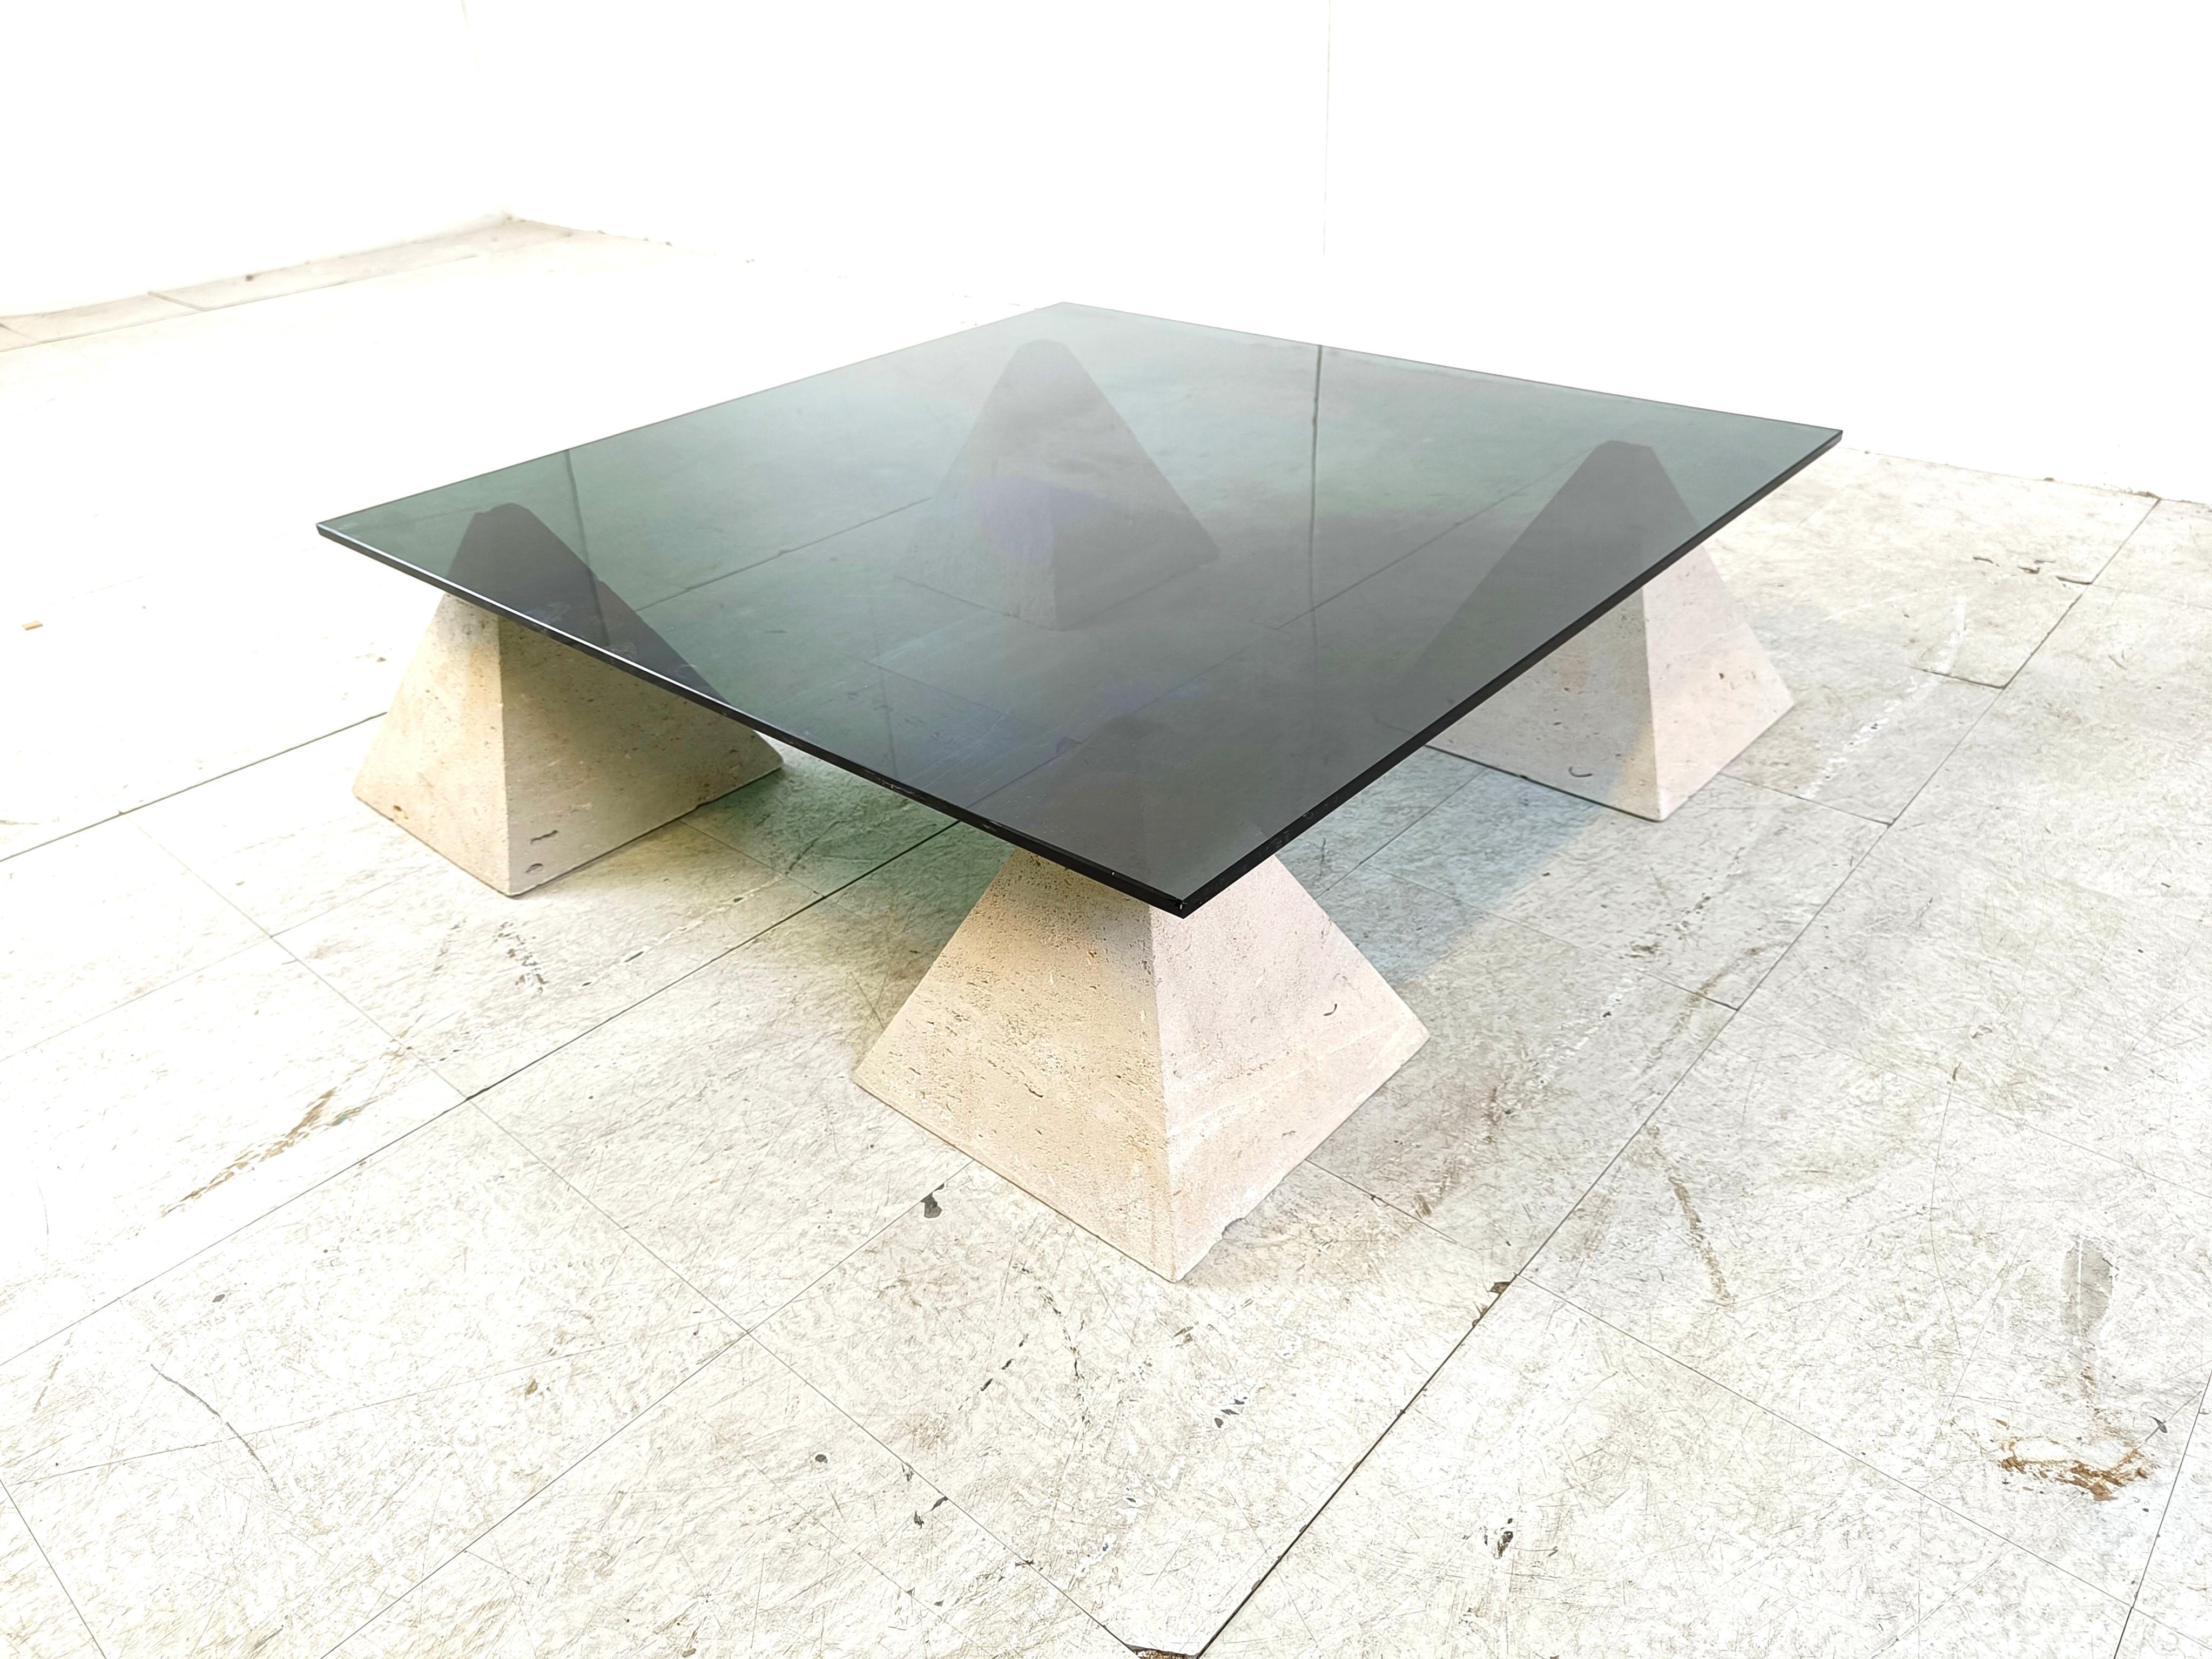 Vintage coffee table consisting of 4 stone pyramid shaped bases with a thick smoked glass top.

Beautiful, timeless design.

1970s - Belgium

The table was made by a local artist.

Height: 26cm
Width: 90cm
Depth: 90cm

Ref.: 203210